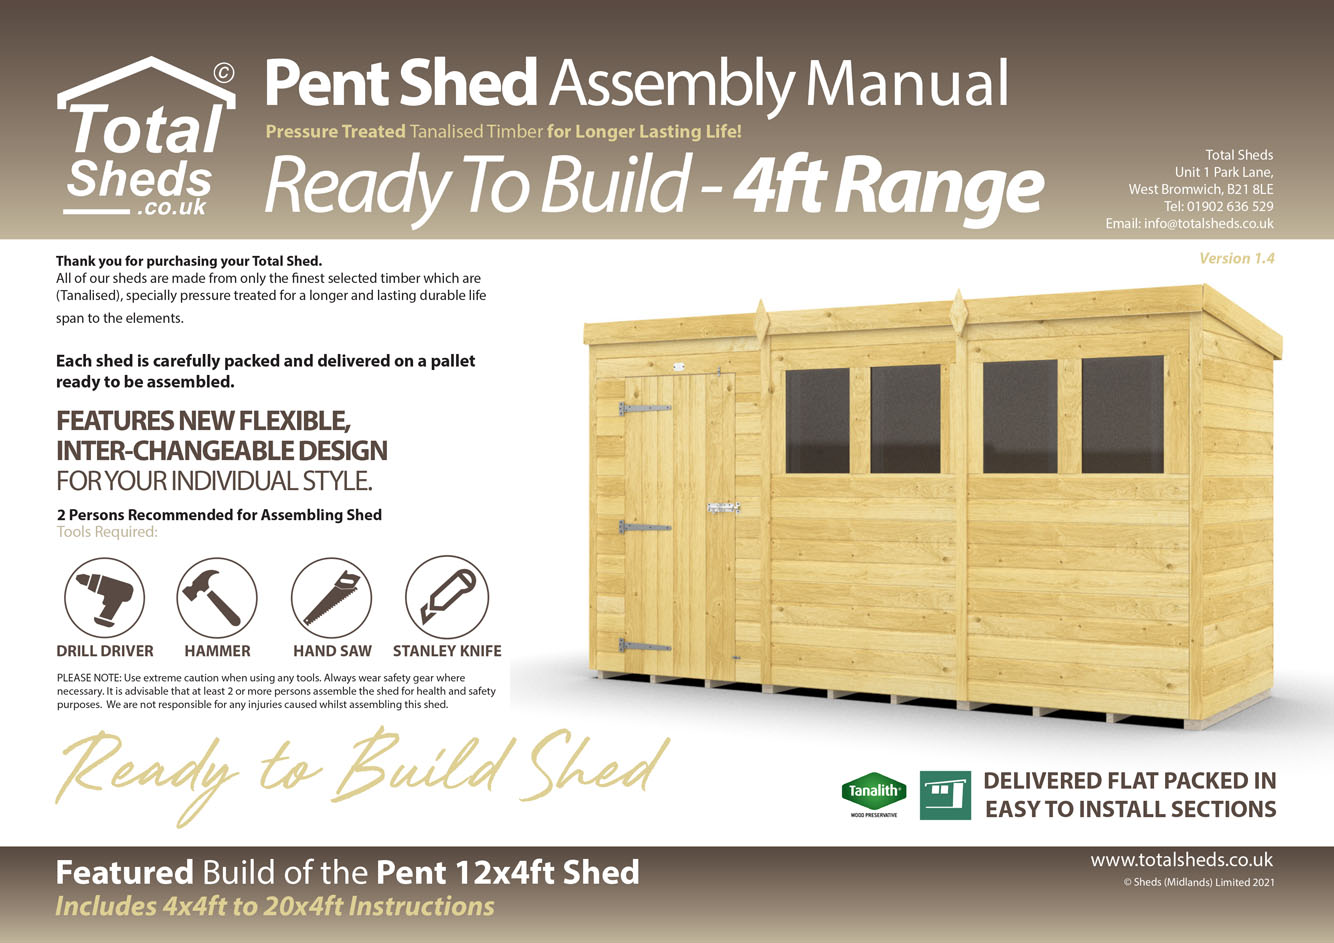 4ft Pent Shed Installation Guide